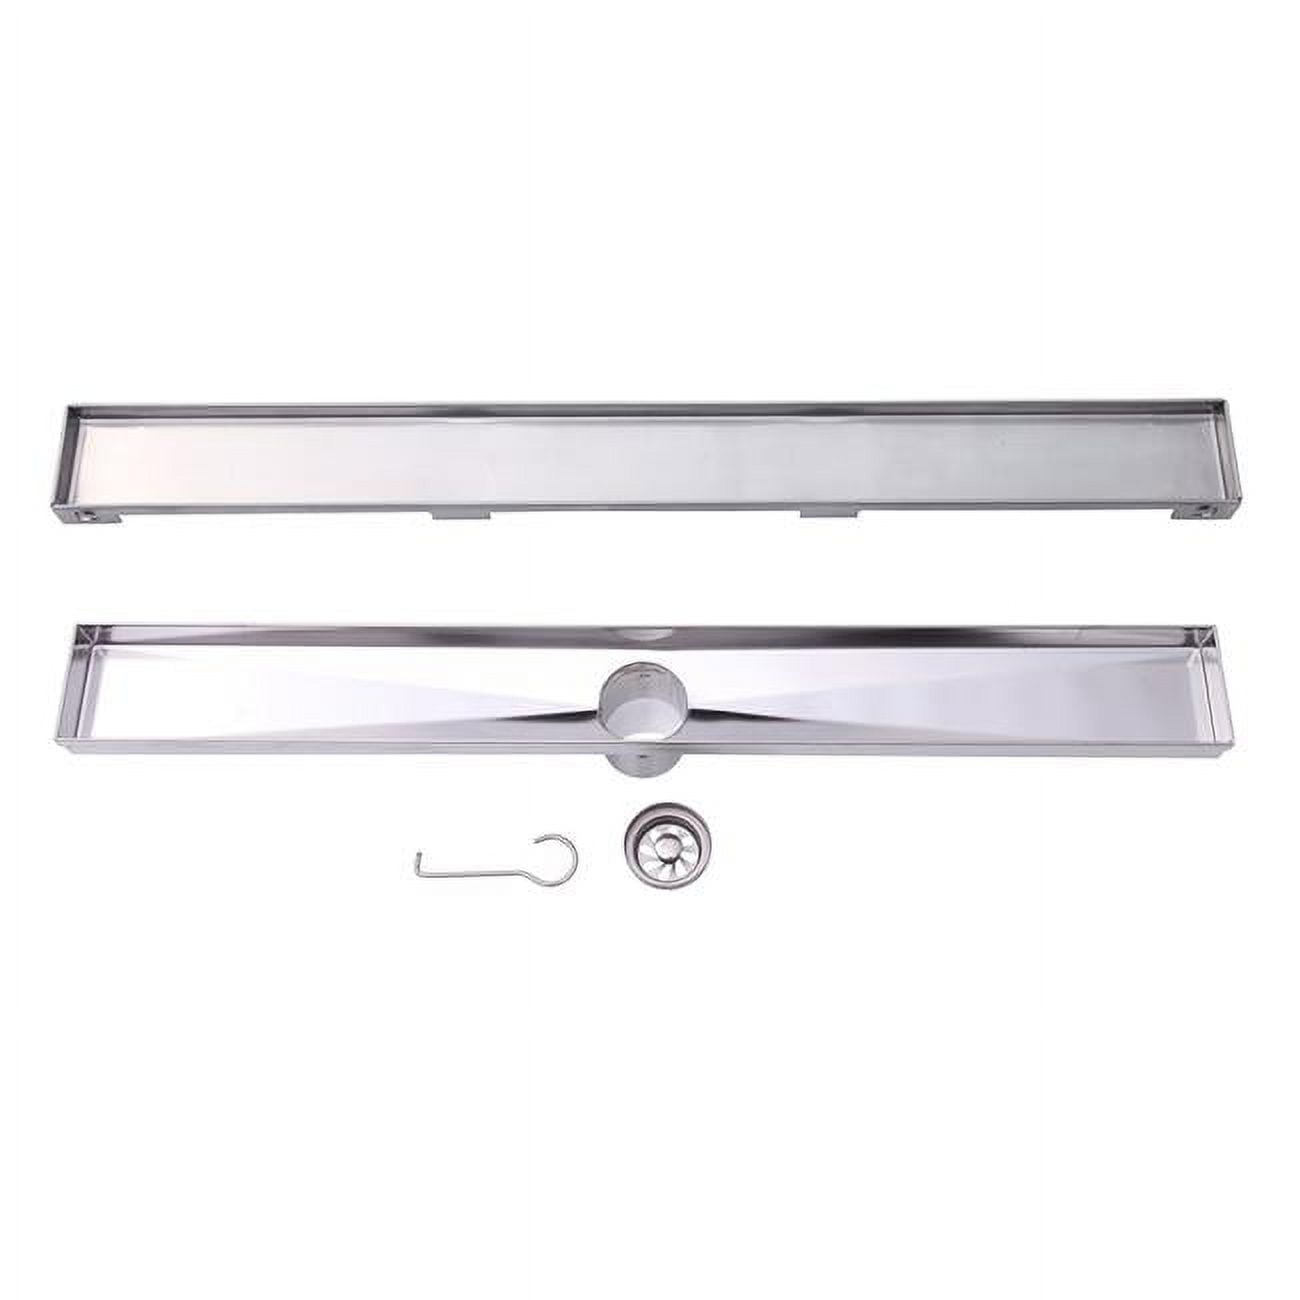 Bnld36c16 Modern Hole Design Stainless Steel Linear Drain - 36 In.